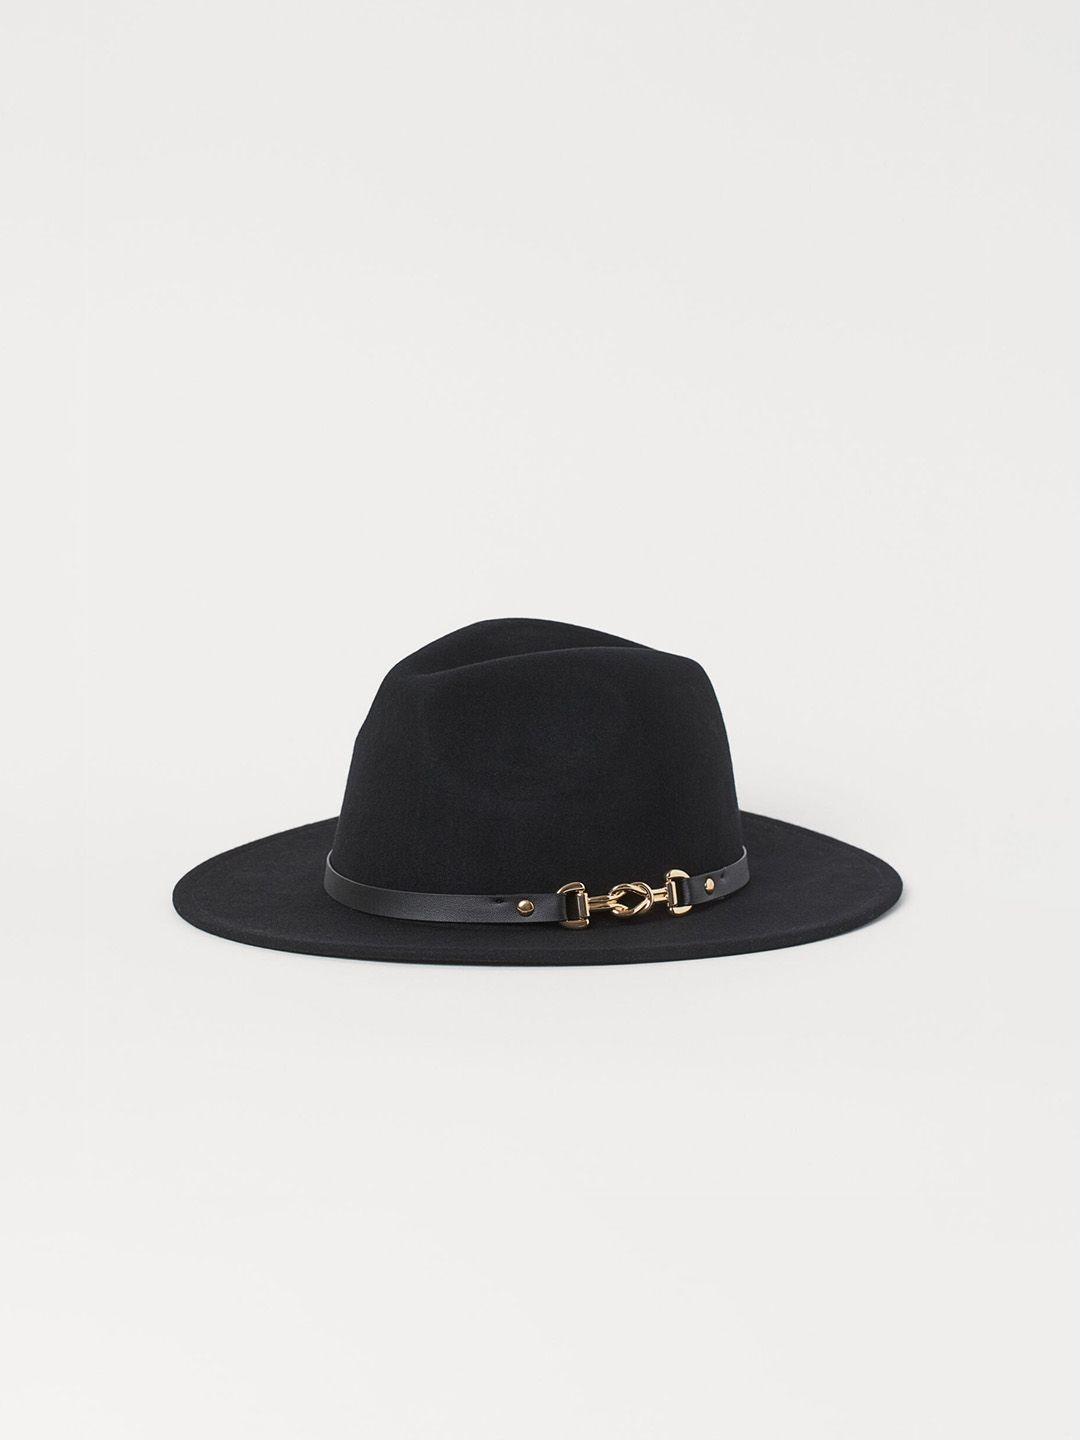 H&M Women Black Felted Wool Hat Price in India